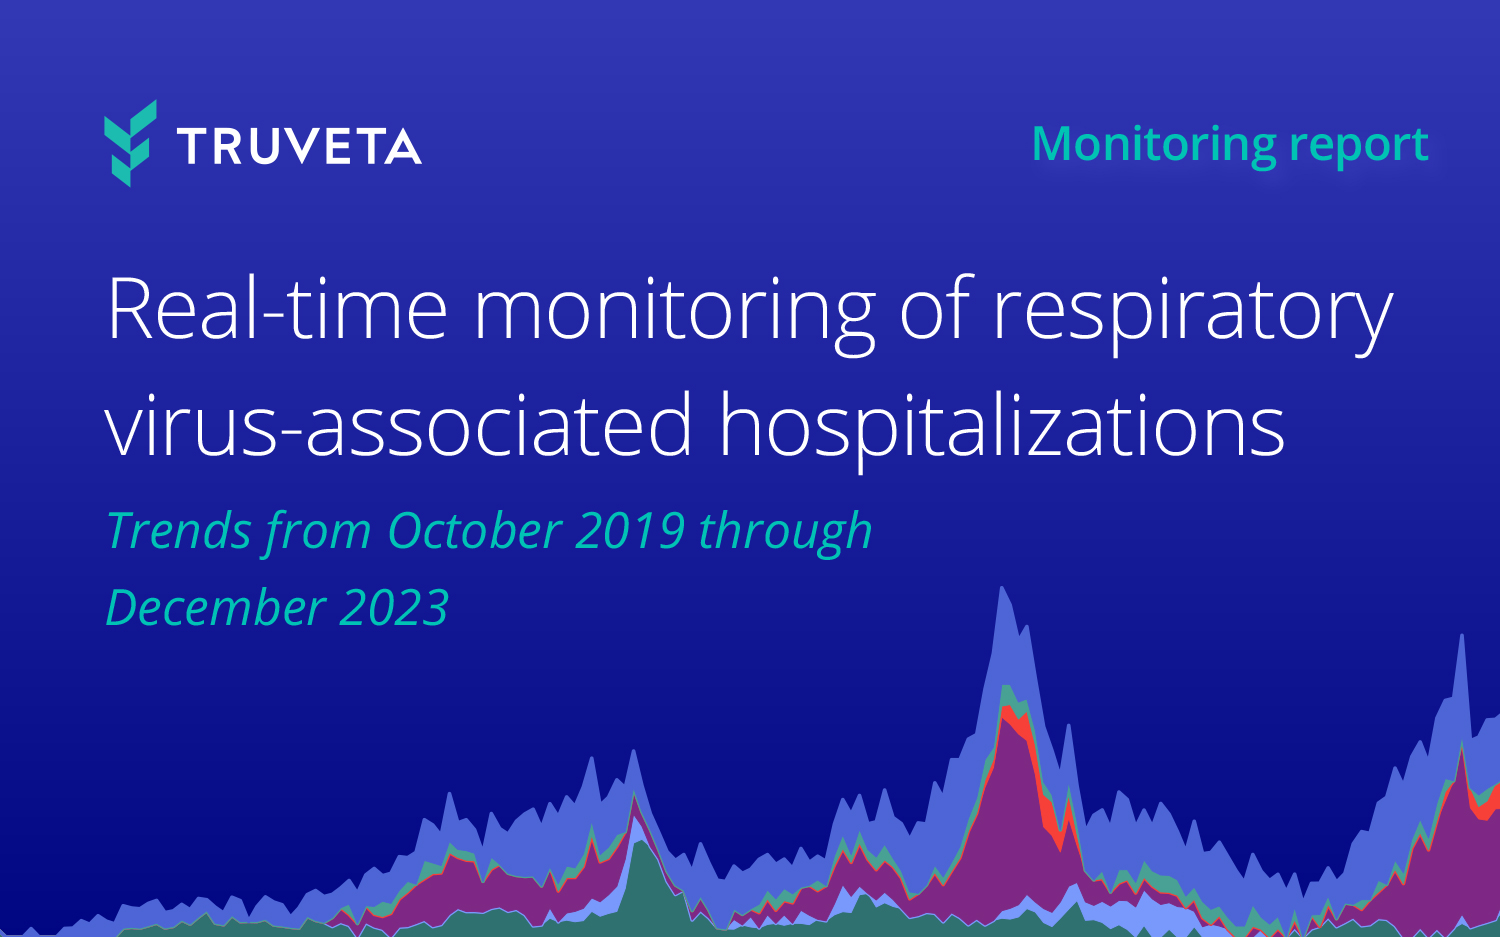 Because Truveta Data provides the most complete, timely, and clean de-identified EHR data, including full patient medical records, notes, and images, linked with claims, SDOH, and mortality data for more than 100 million patients across the US, Truveta Research can show the latest trends in these respiratory virus-associated hospitalizations